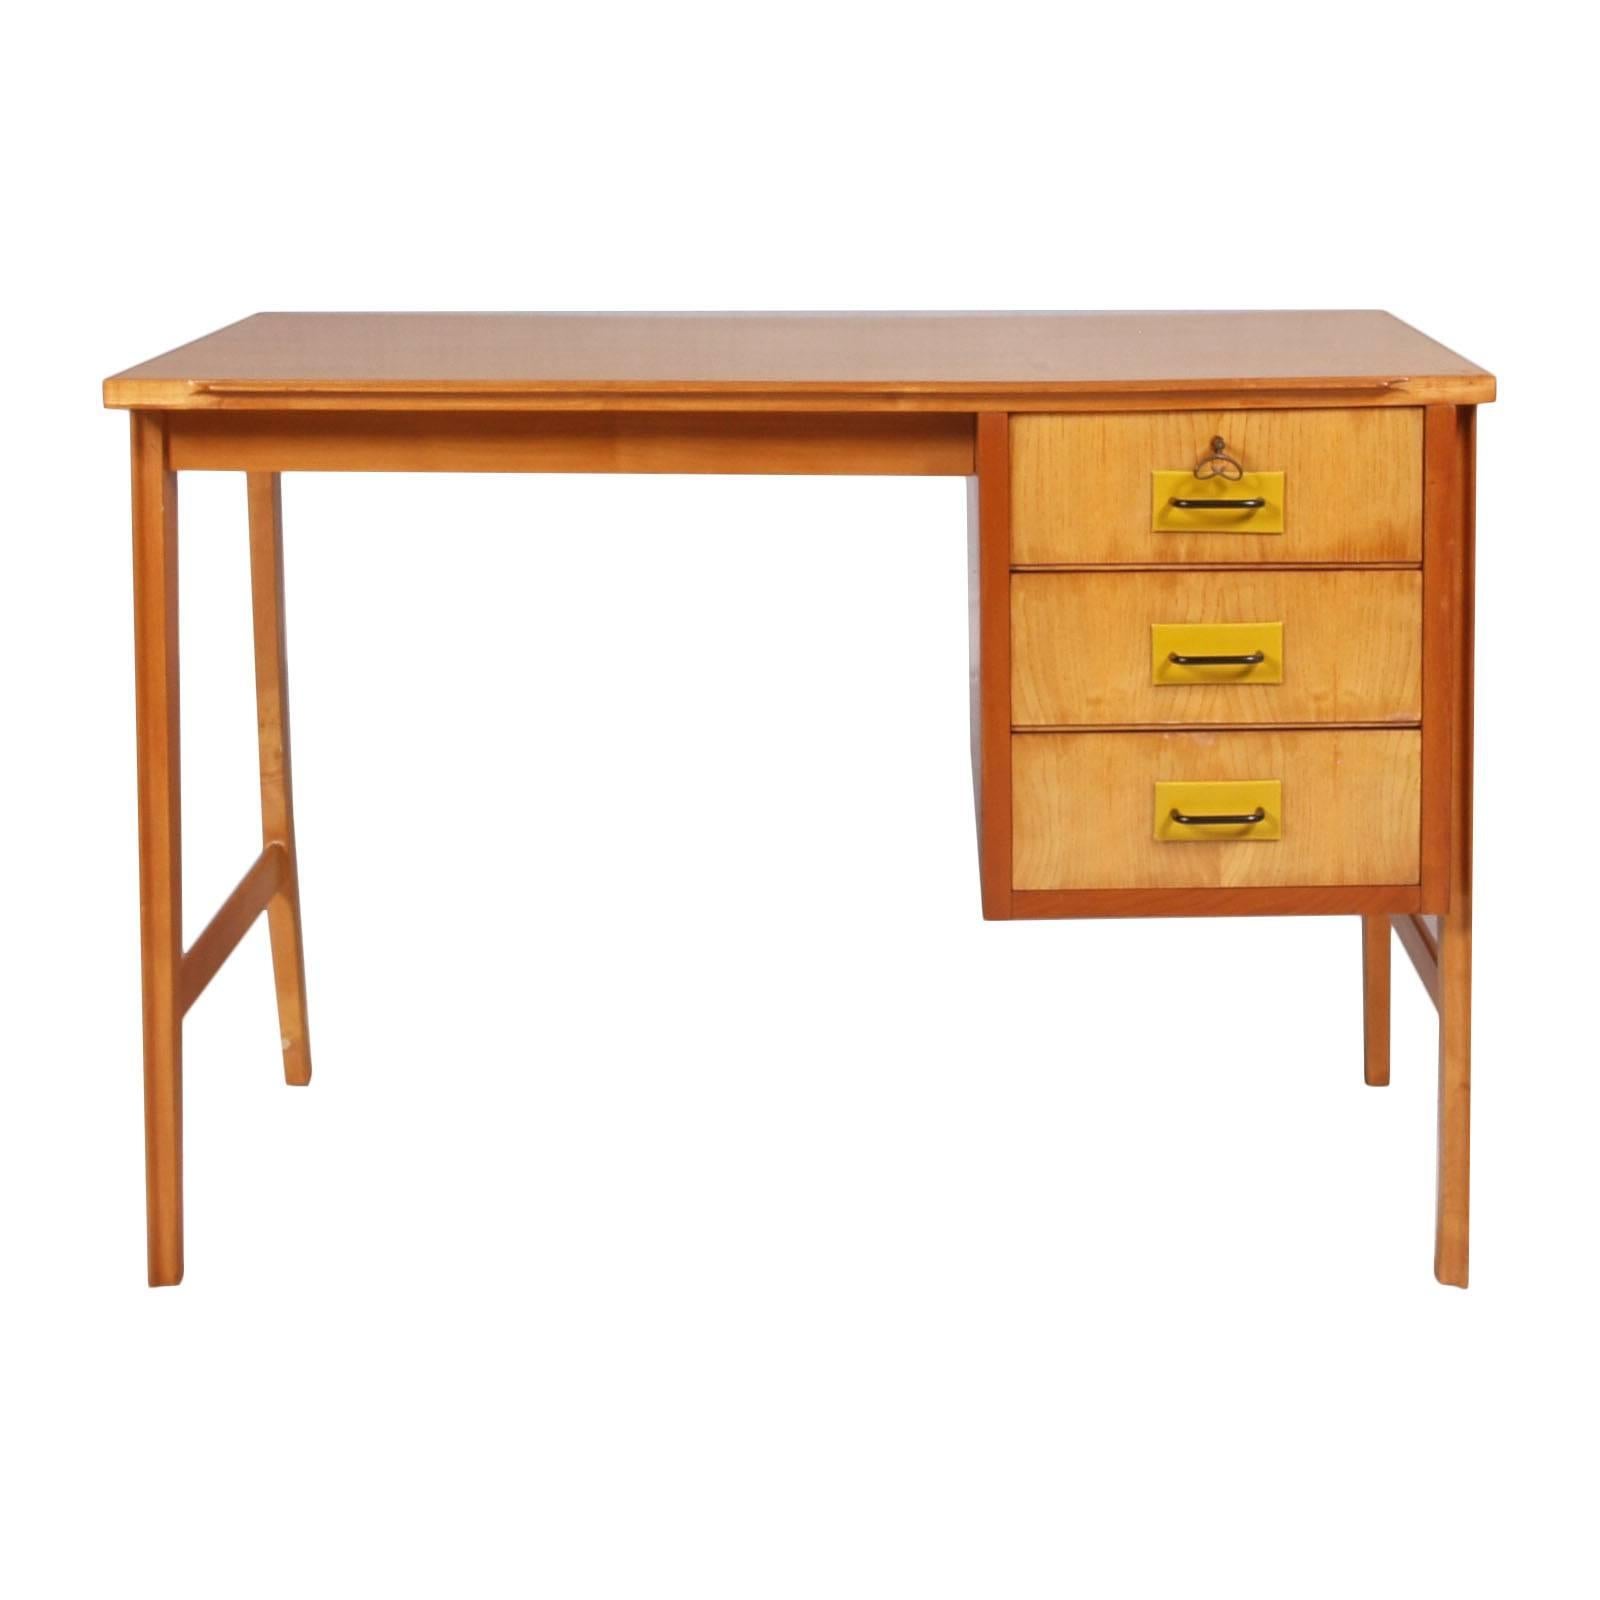 Mid-Century Modern Carlo di Carli writing desk in solid beech, maple,  and mahogany the bottom of the three drawers. Lacquered steel handles with leather 
Mobili di Cantù , cabinetmaker, labelled.
Excellent conditions.

Measures cm: H 78 x W 110 x D